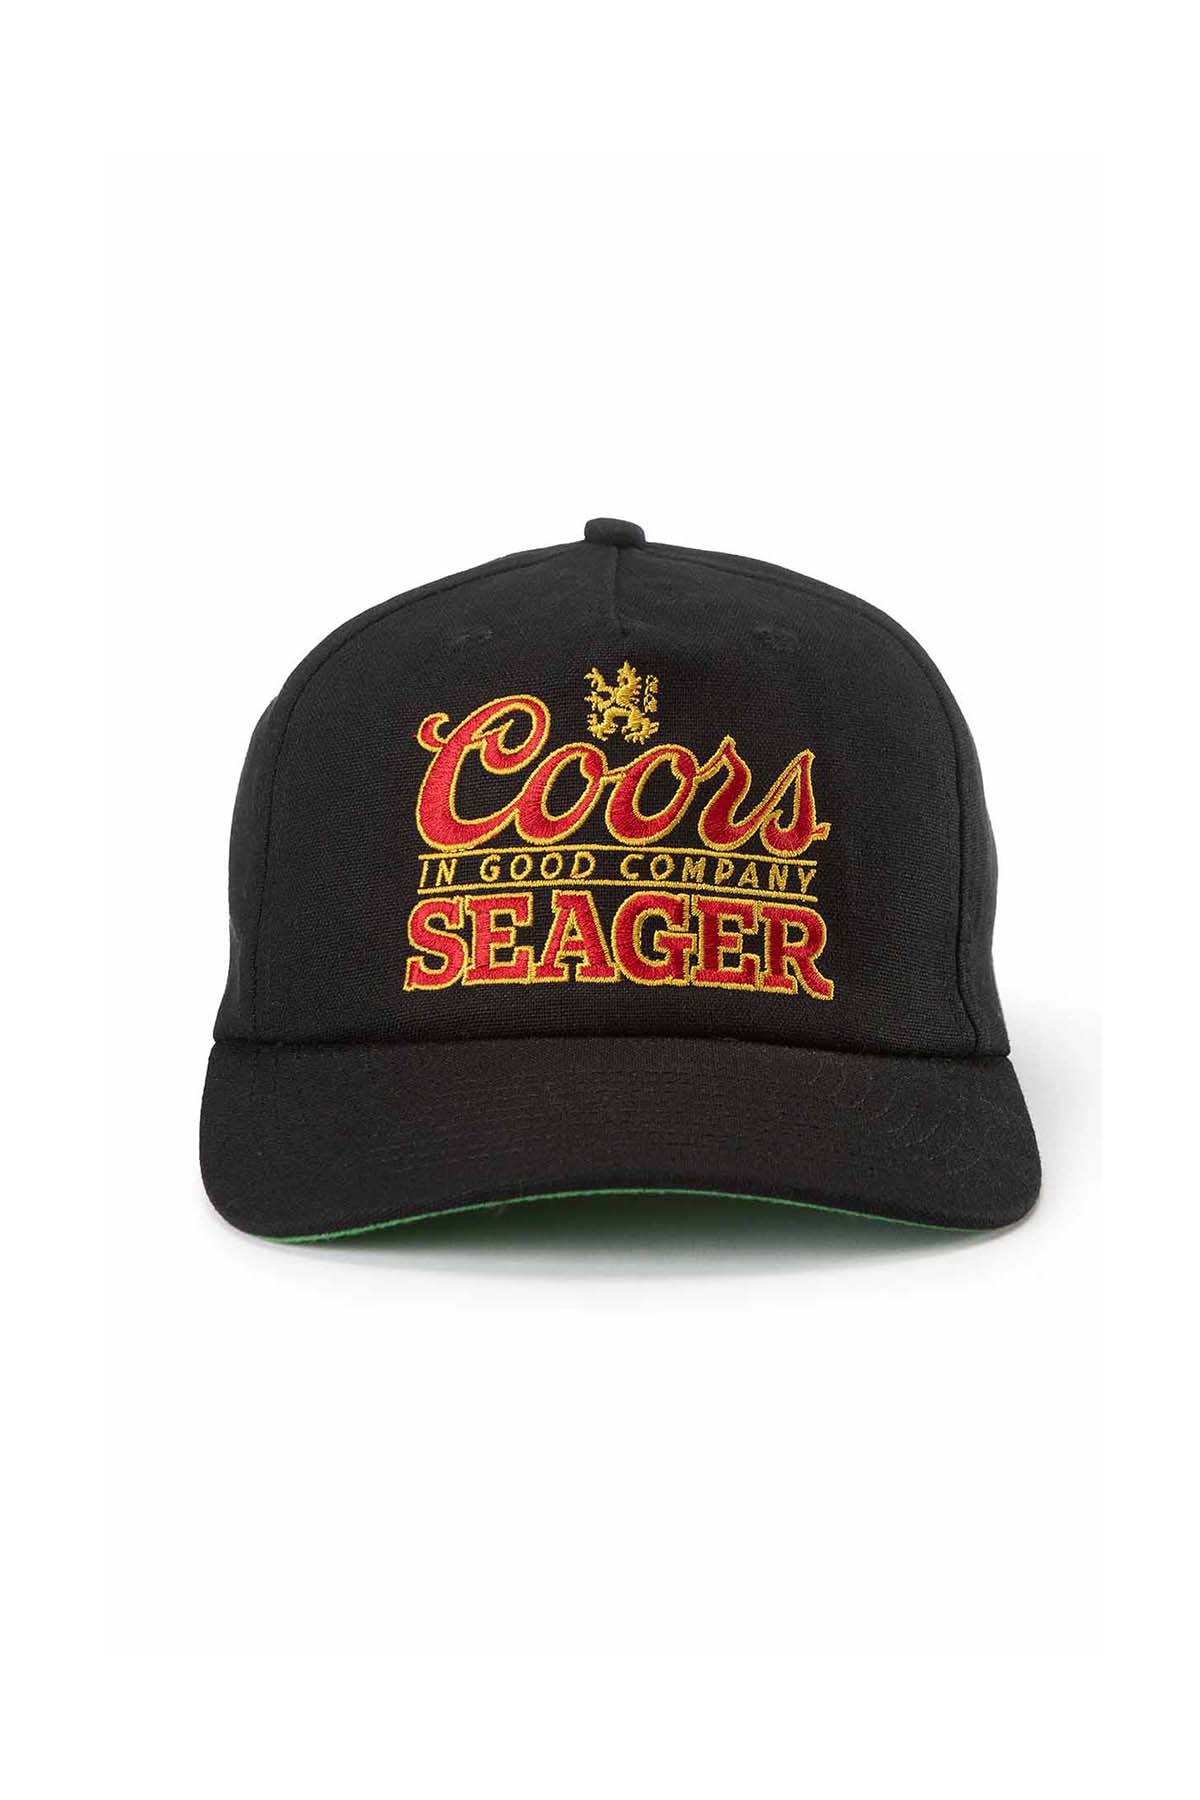 Seager - Coors Brand Snapback - Black - Front